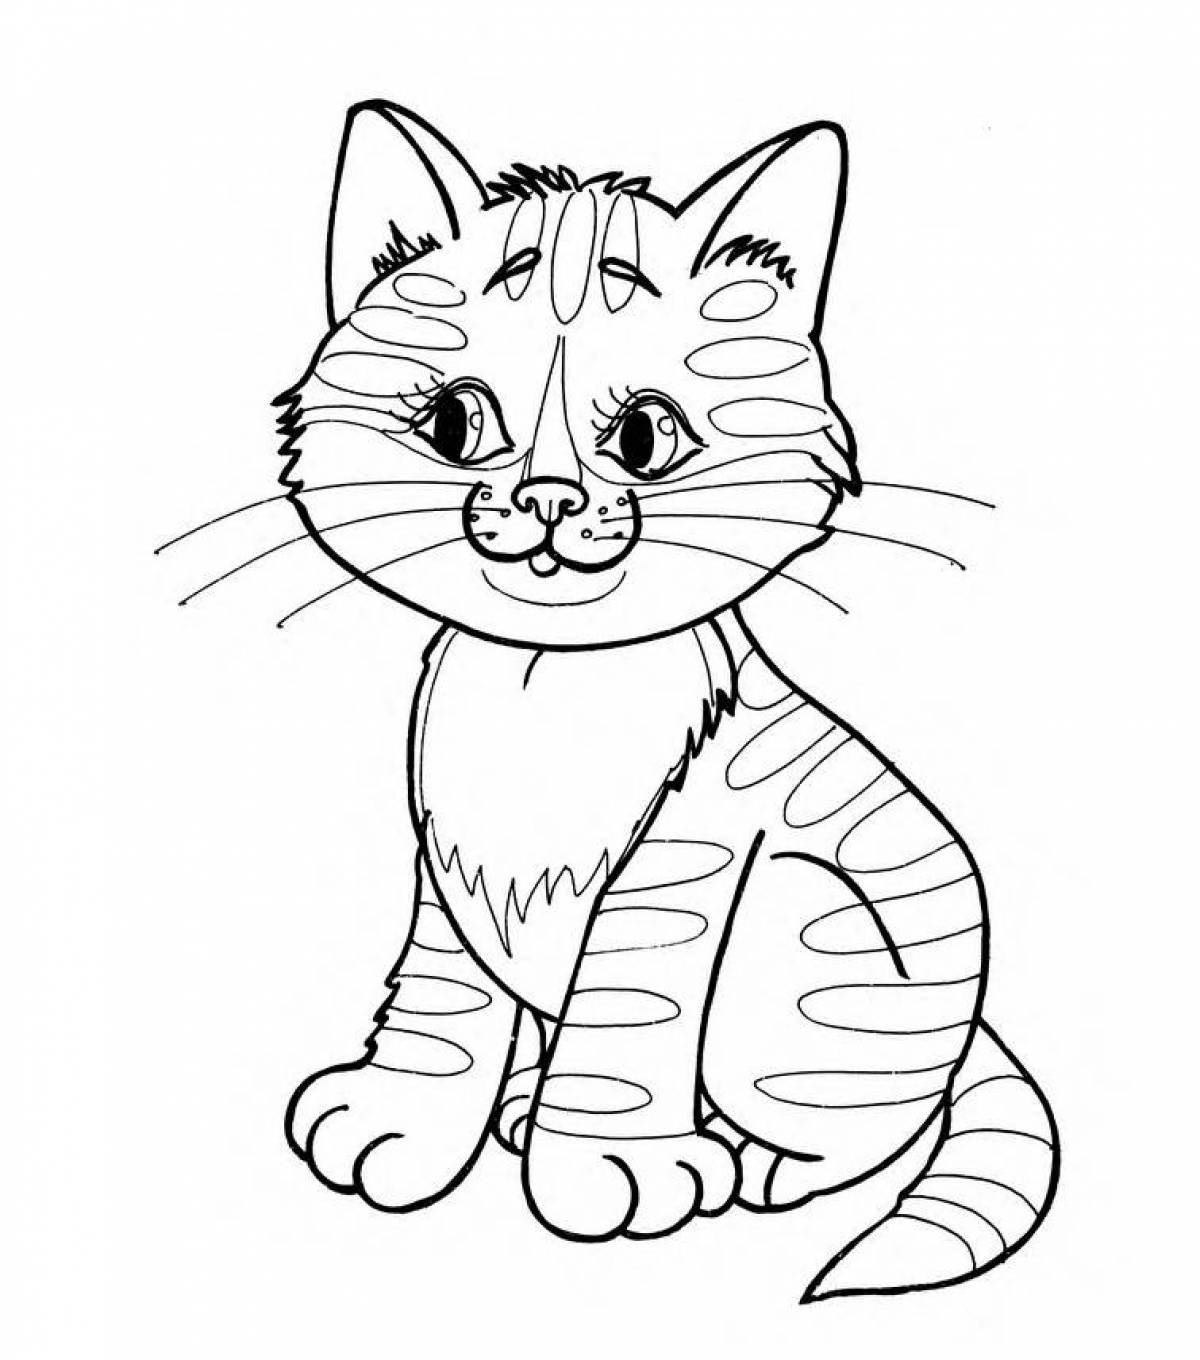 Crazy animal coloring pages for kids 5-7 years old